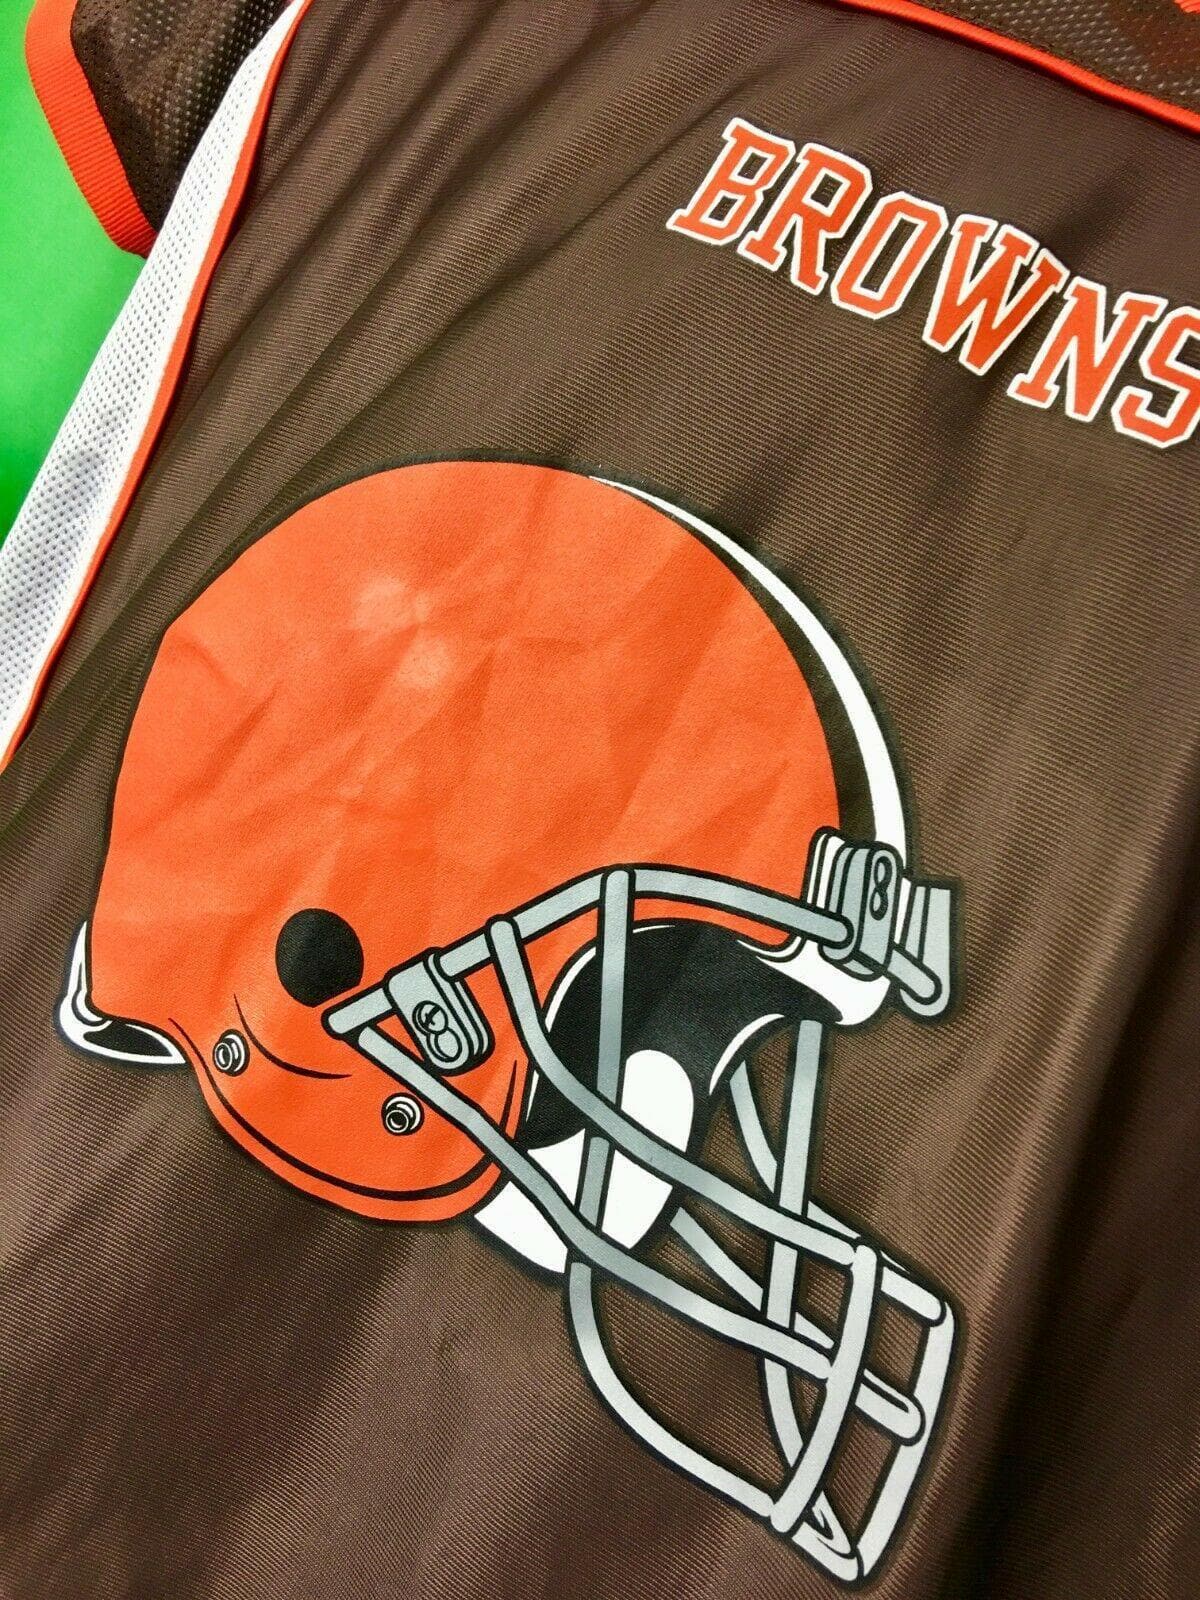 NFL Cleveland Browns Authentic Kids' Flag Football Shirt Youth Large 14-16